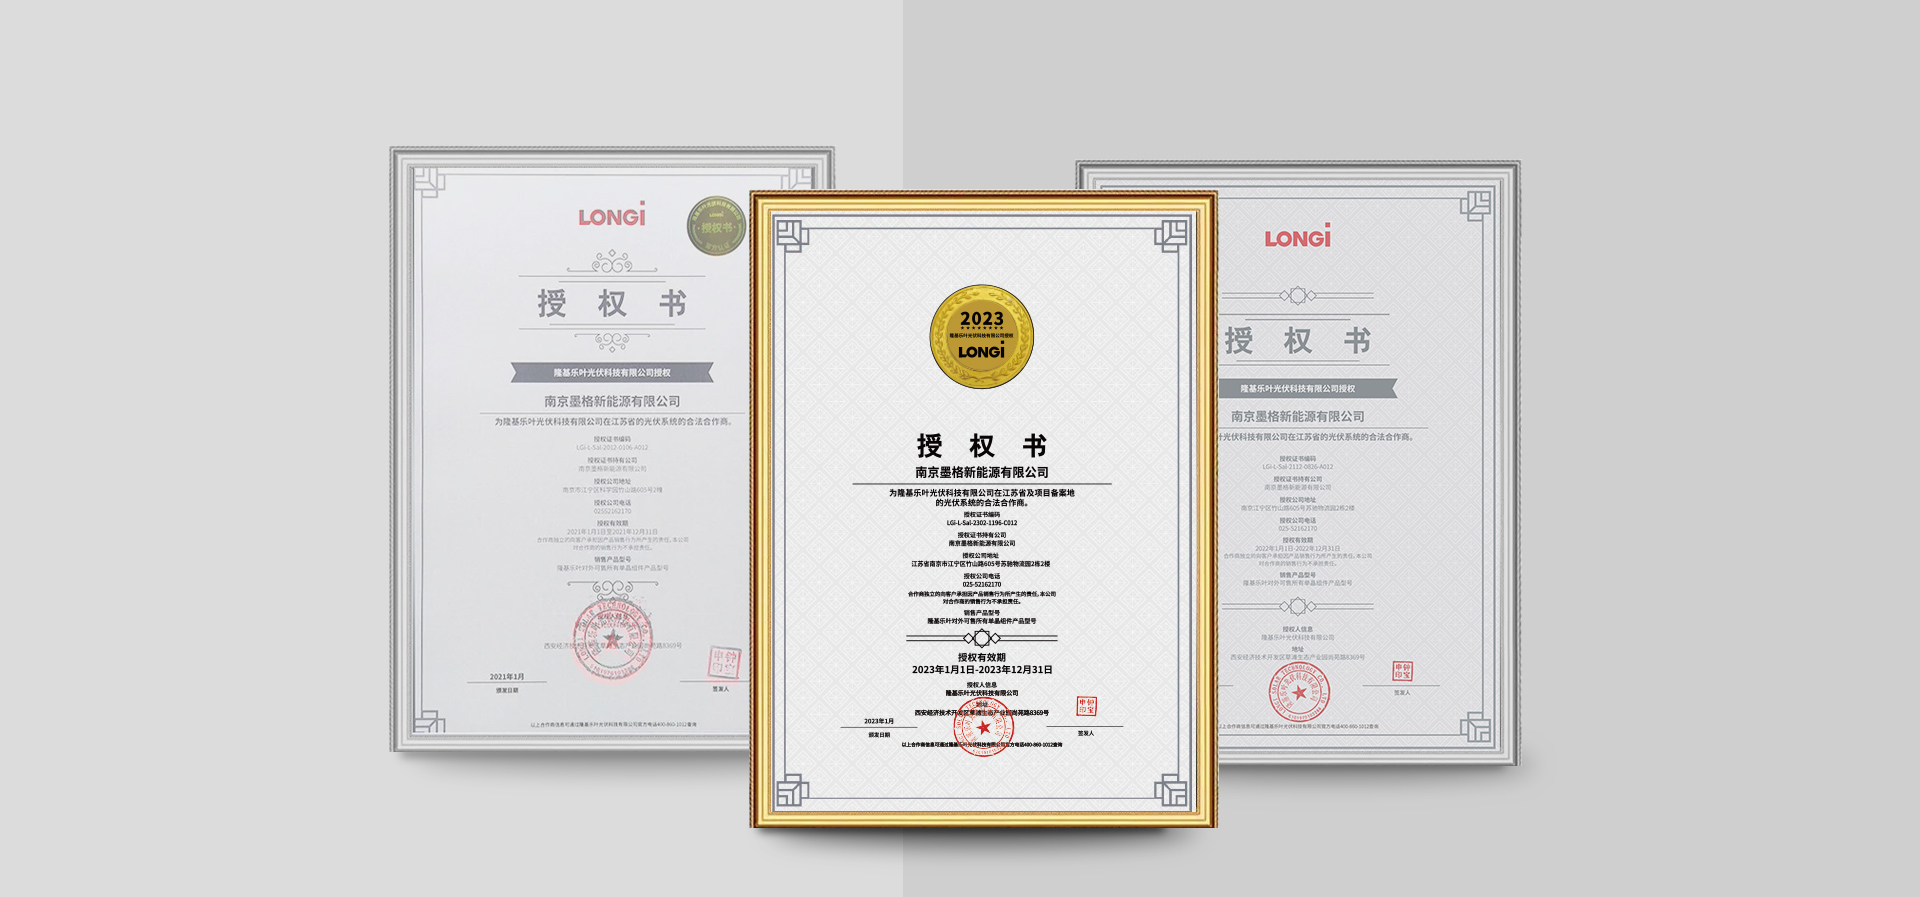 Longi solar official authorized distributor certificate